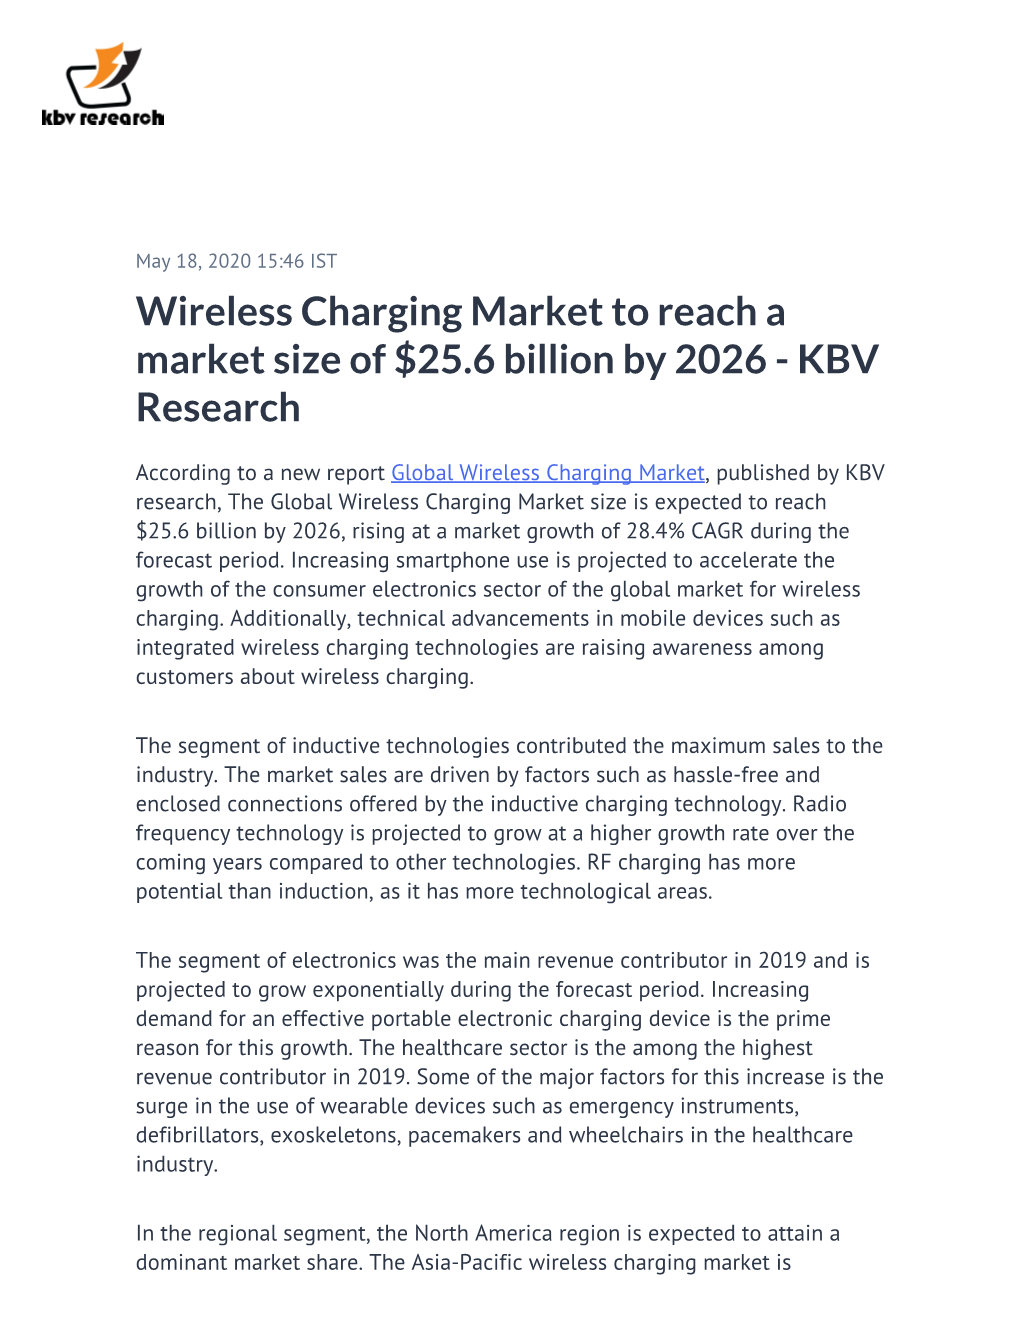 Wireless Charging Market to Reach a Market Size of $25.6 Billion by 2026 - KBV Research